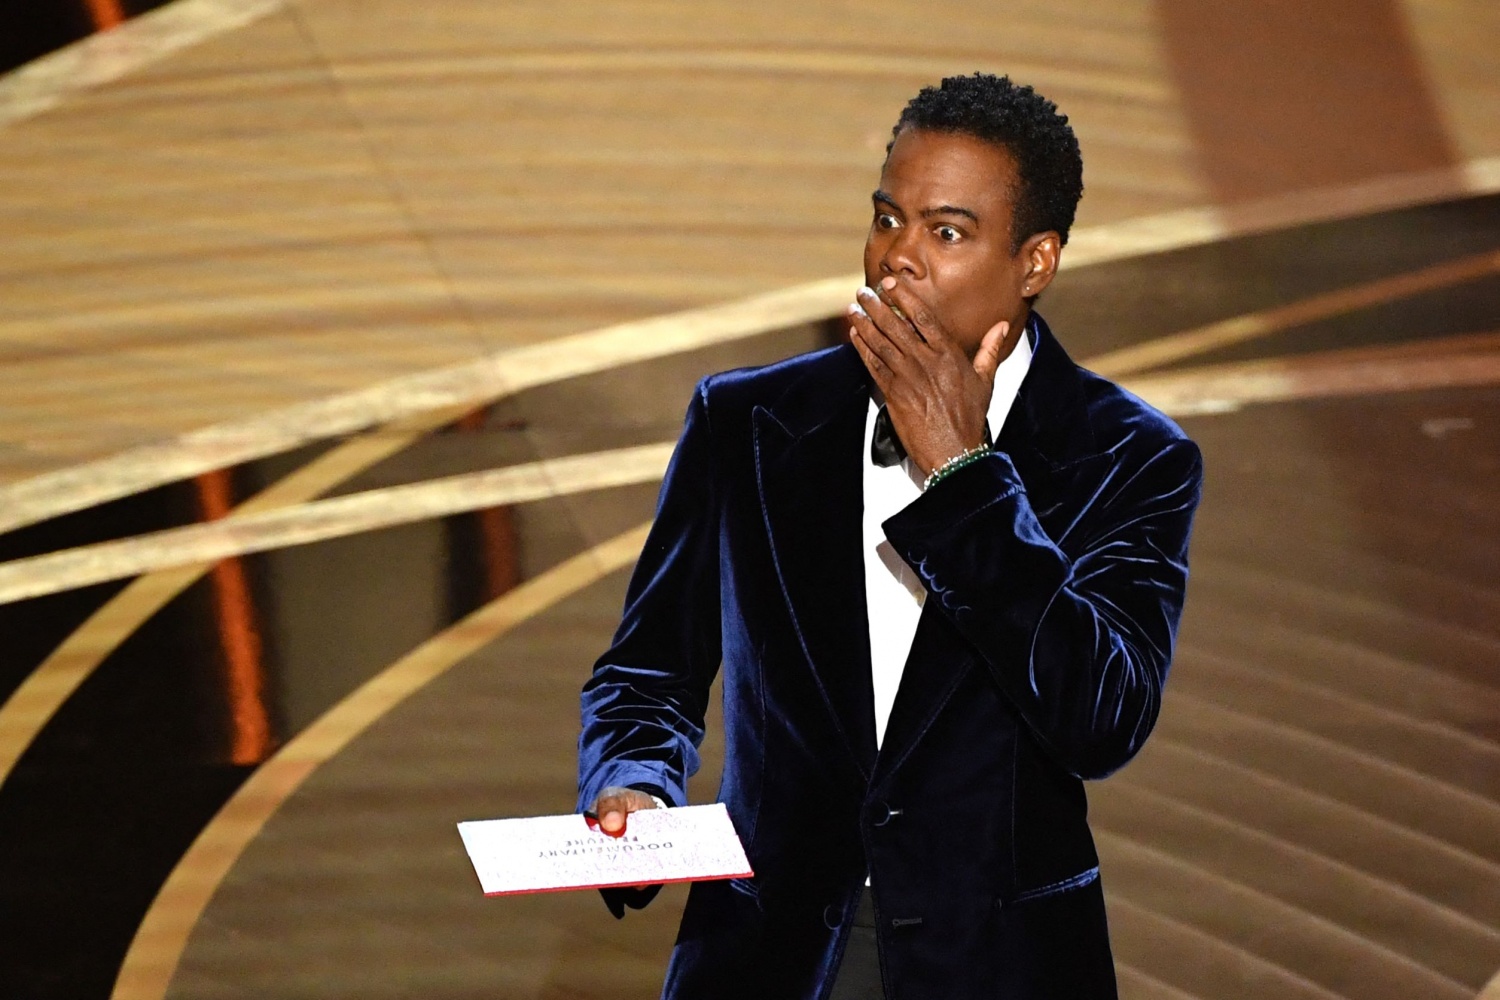 US actor Chris Rock speaks onstage during the 94th Oscars at the Dolby Theatre in Hollywood, California on March 27, 2022. (Photo by Robyn Beck / AFP)